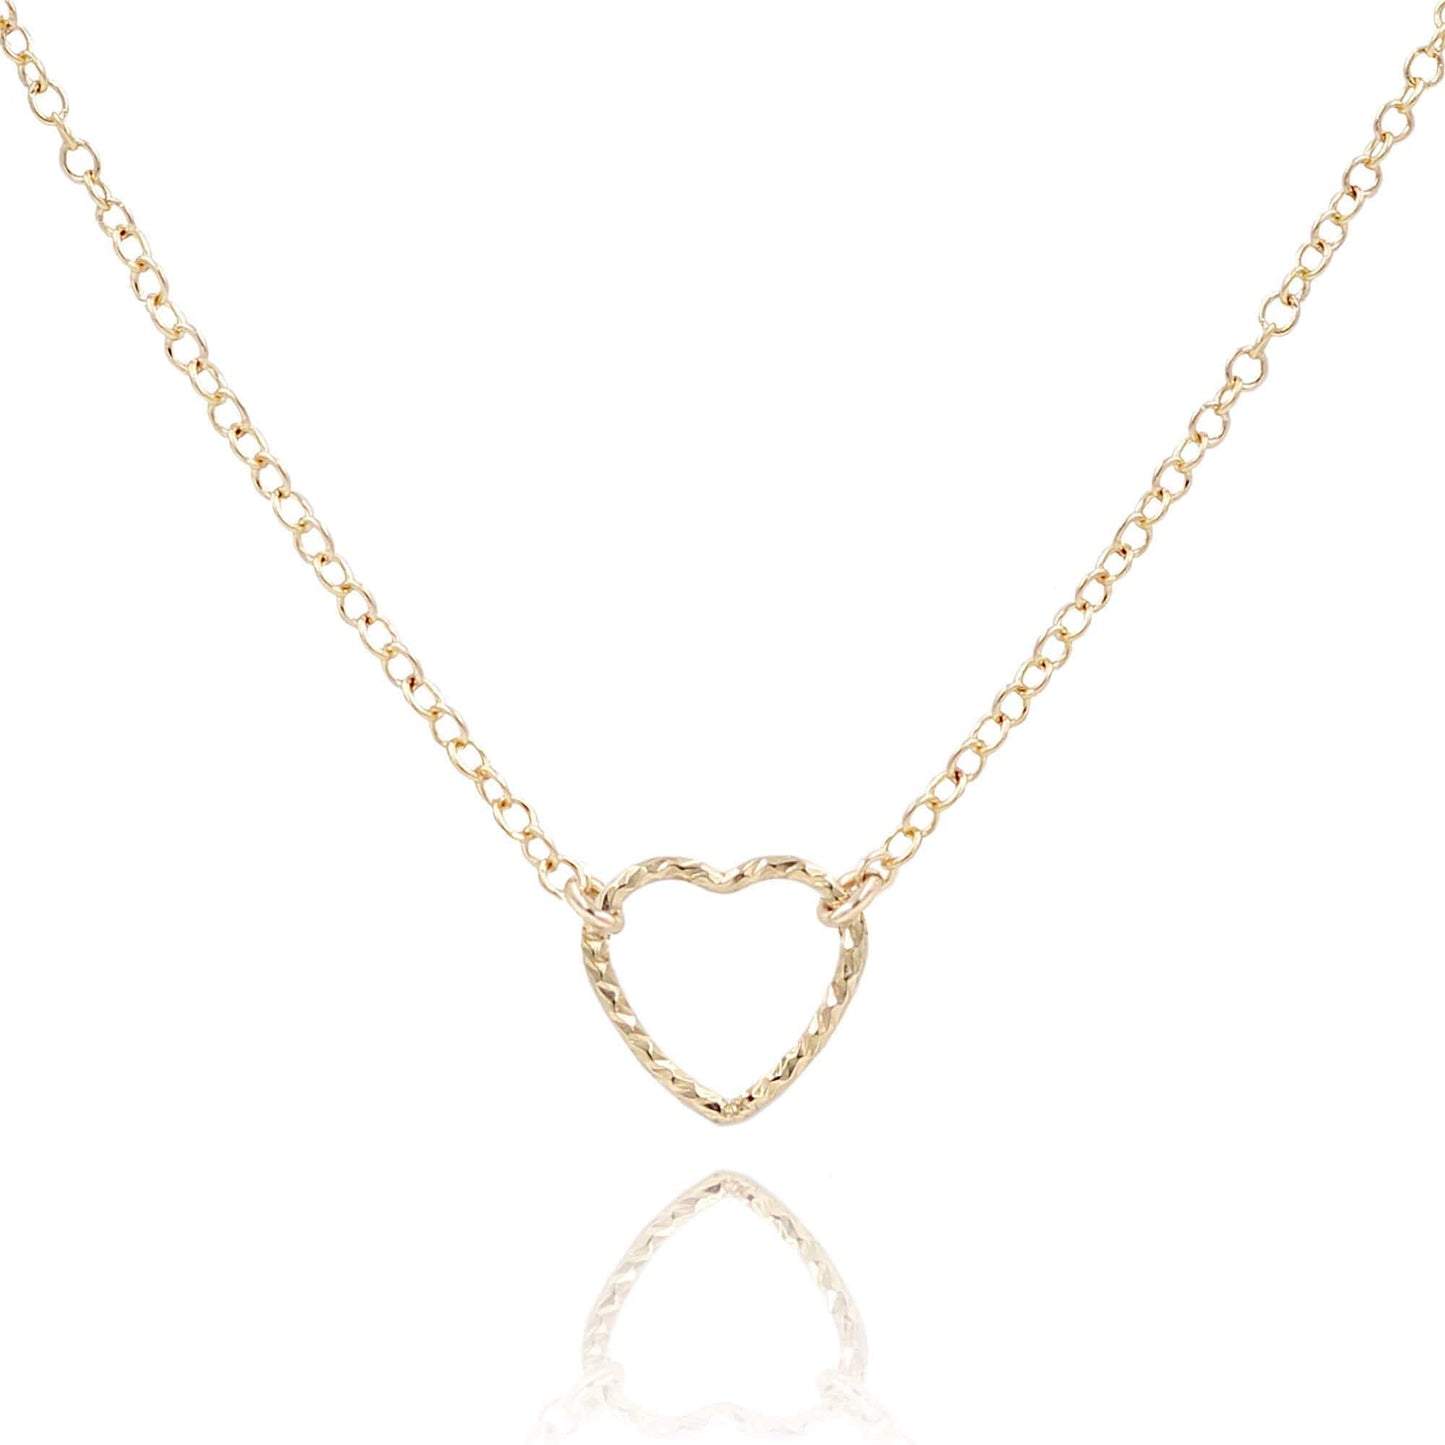 You're my Favorite Necklace Dainty Necklace 16" - 18" MaeMae Jewelry | You're my Favorite Necklace | Carded Jewelry | Hear Necklace